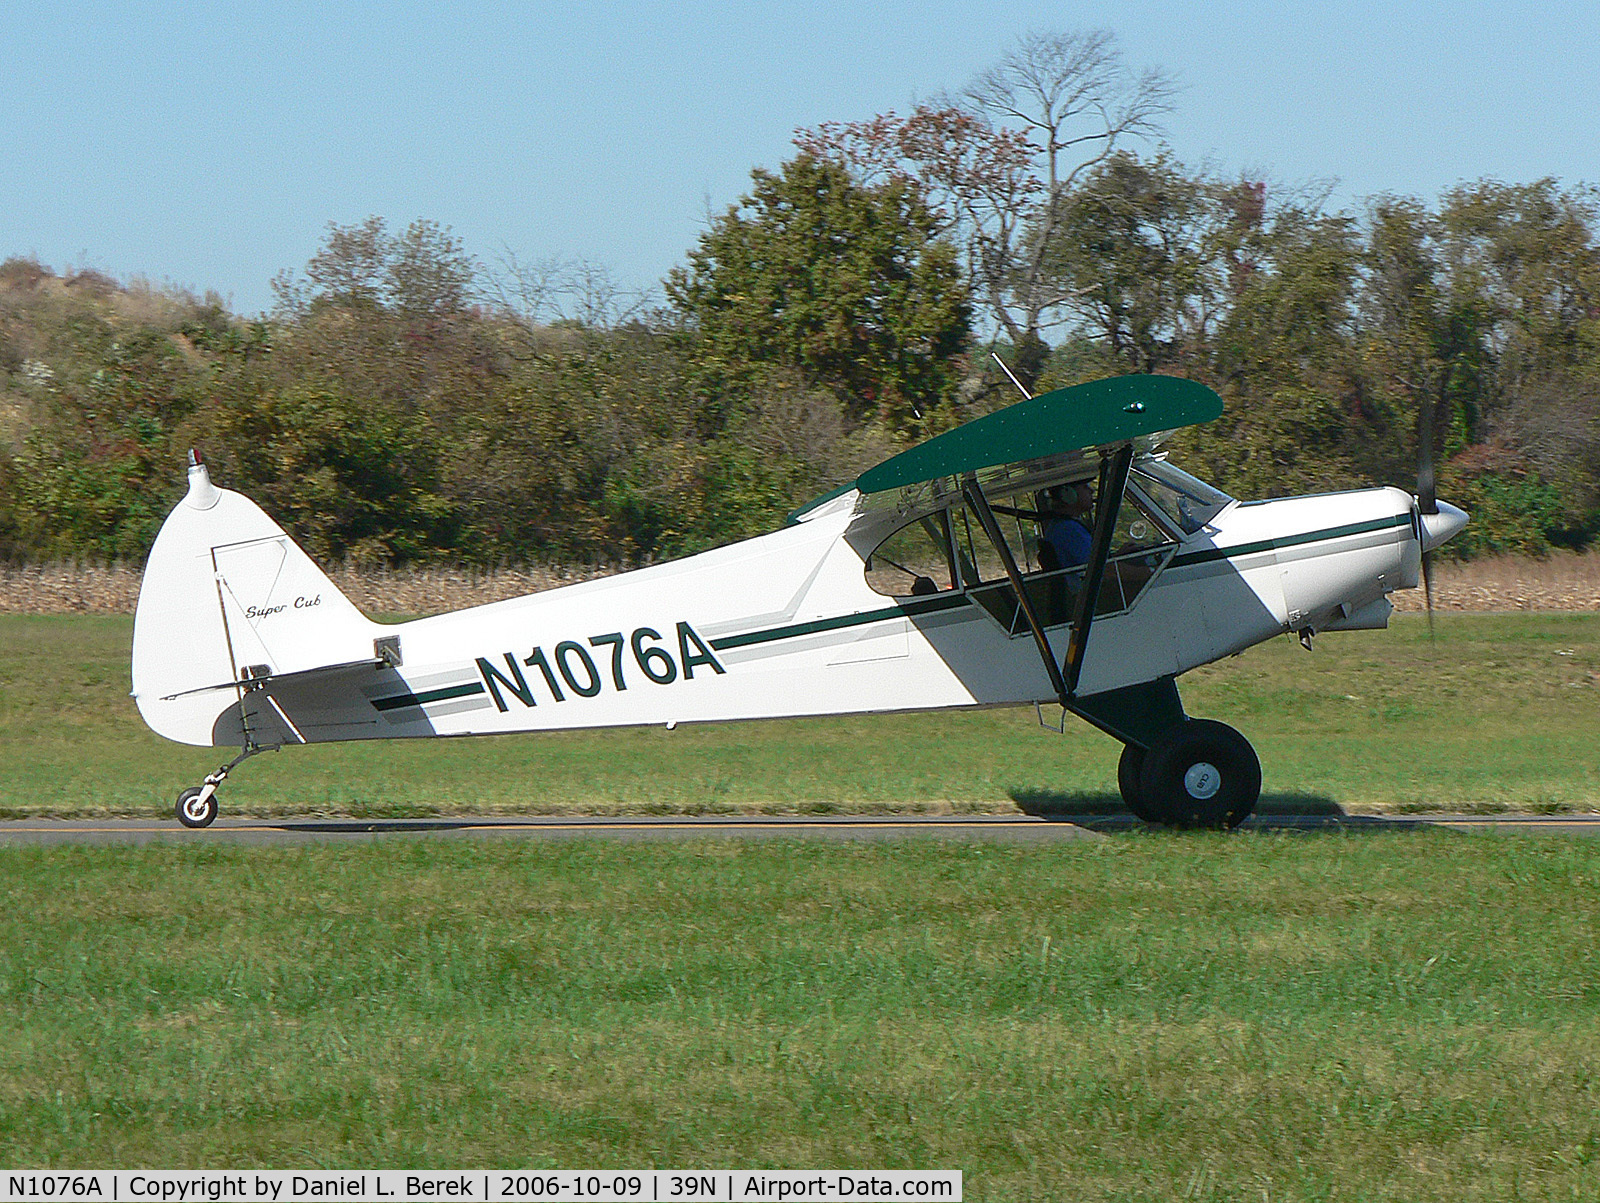 N1076A, 1951 Piper PA-18 C/N 18-659, Handsome 1951 Super Cub taxies out at Princeton Airport.